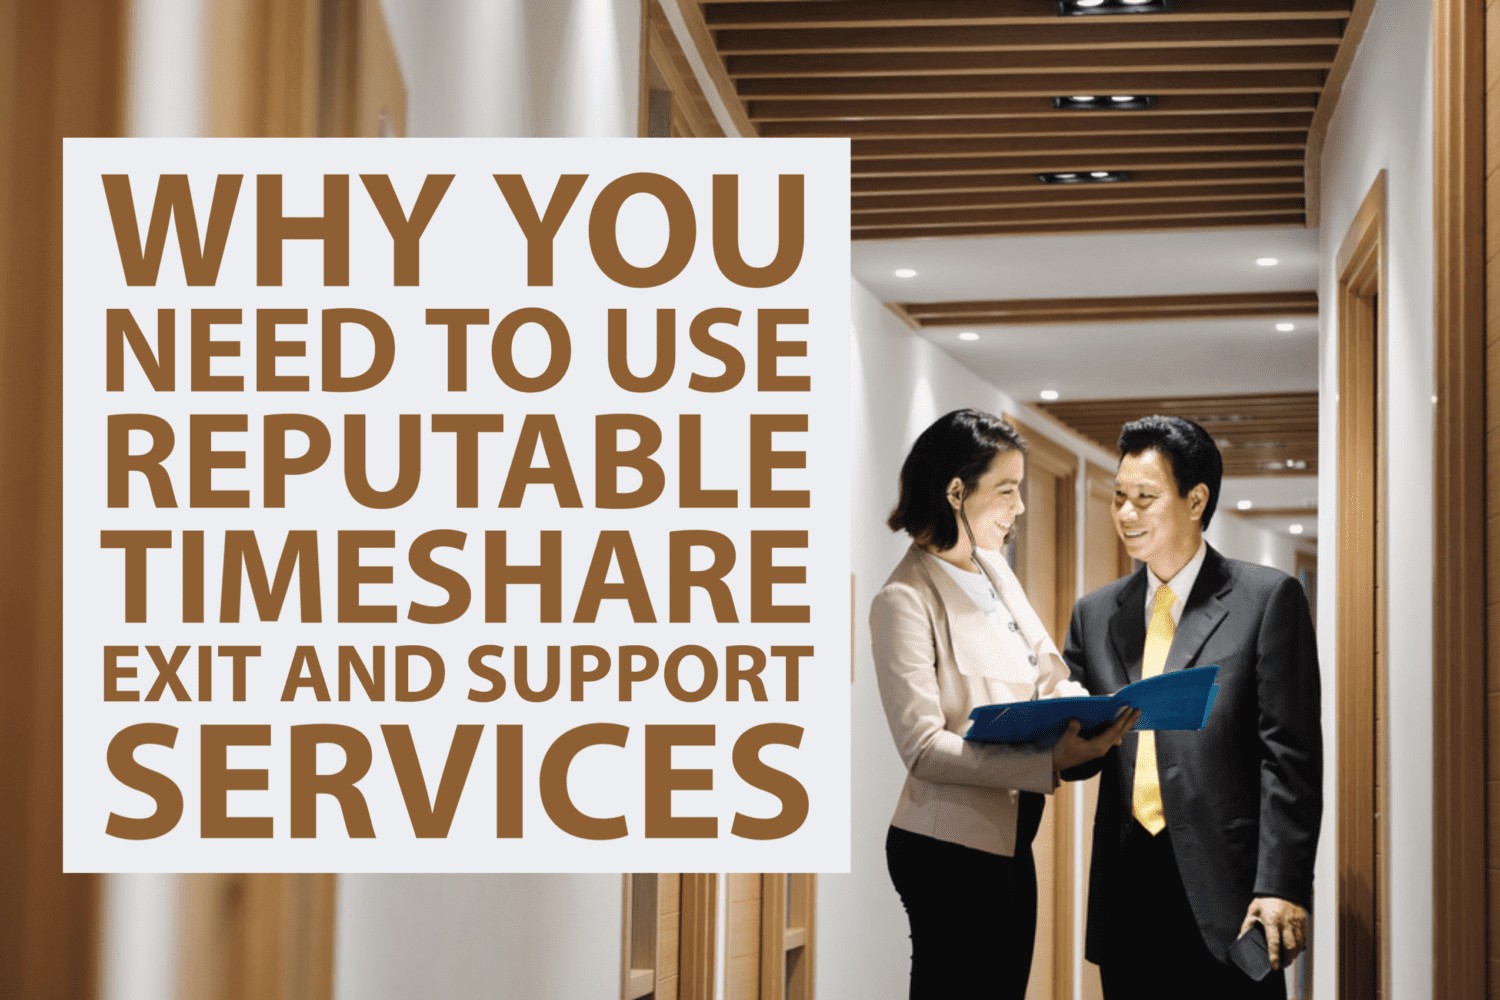 timeshare exit and support services